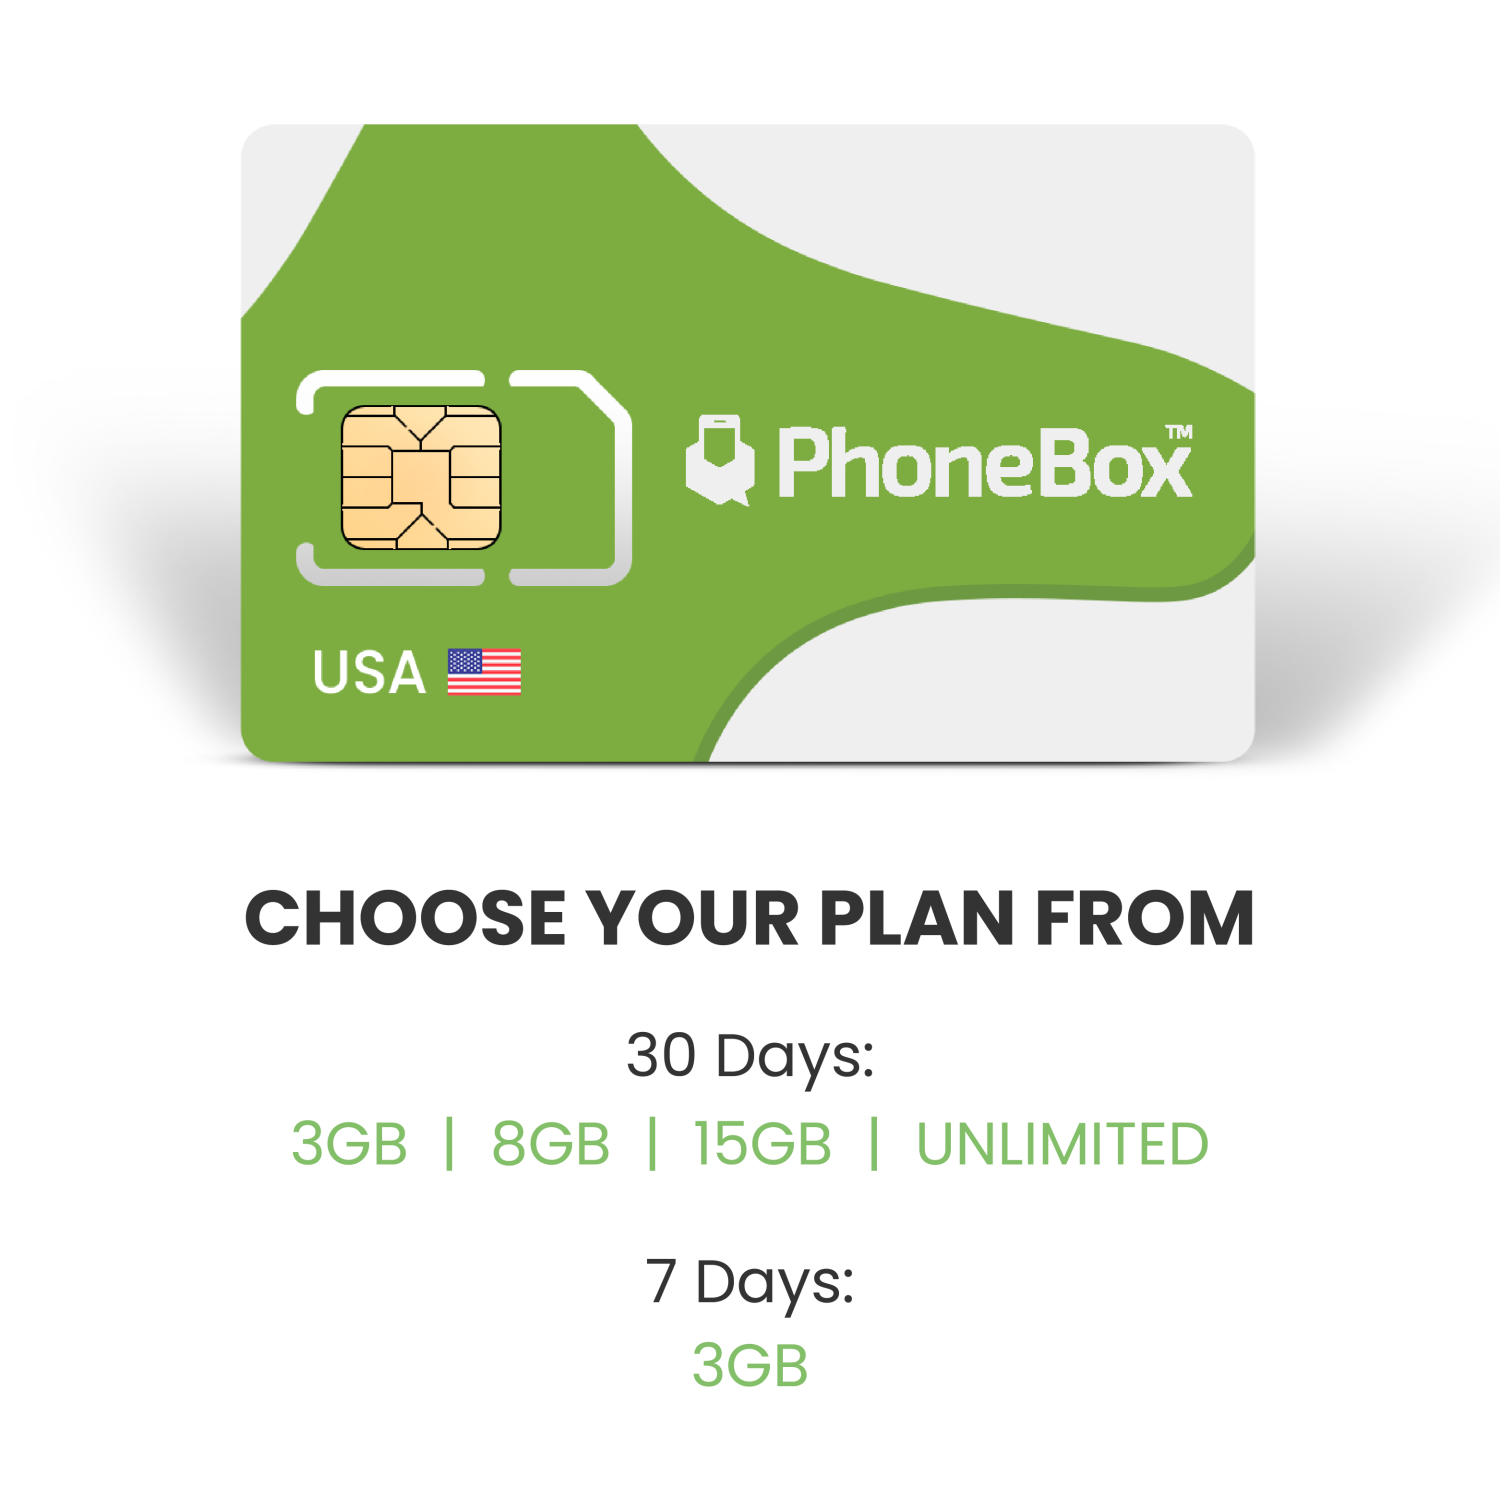 PhoneBox USA Prepaid SIM Card | Choose 3GB, 8GB, 15GB or Unlimited for 30 Days or 3GB for 7 Days | No Contracts! 5G Data, Affordable Phone Plans! Talk, Text, Data! No overage fees!